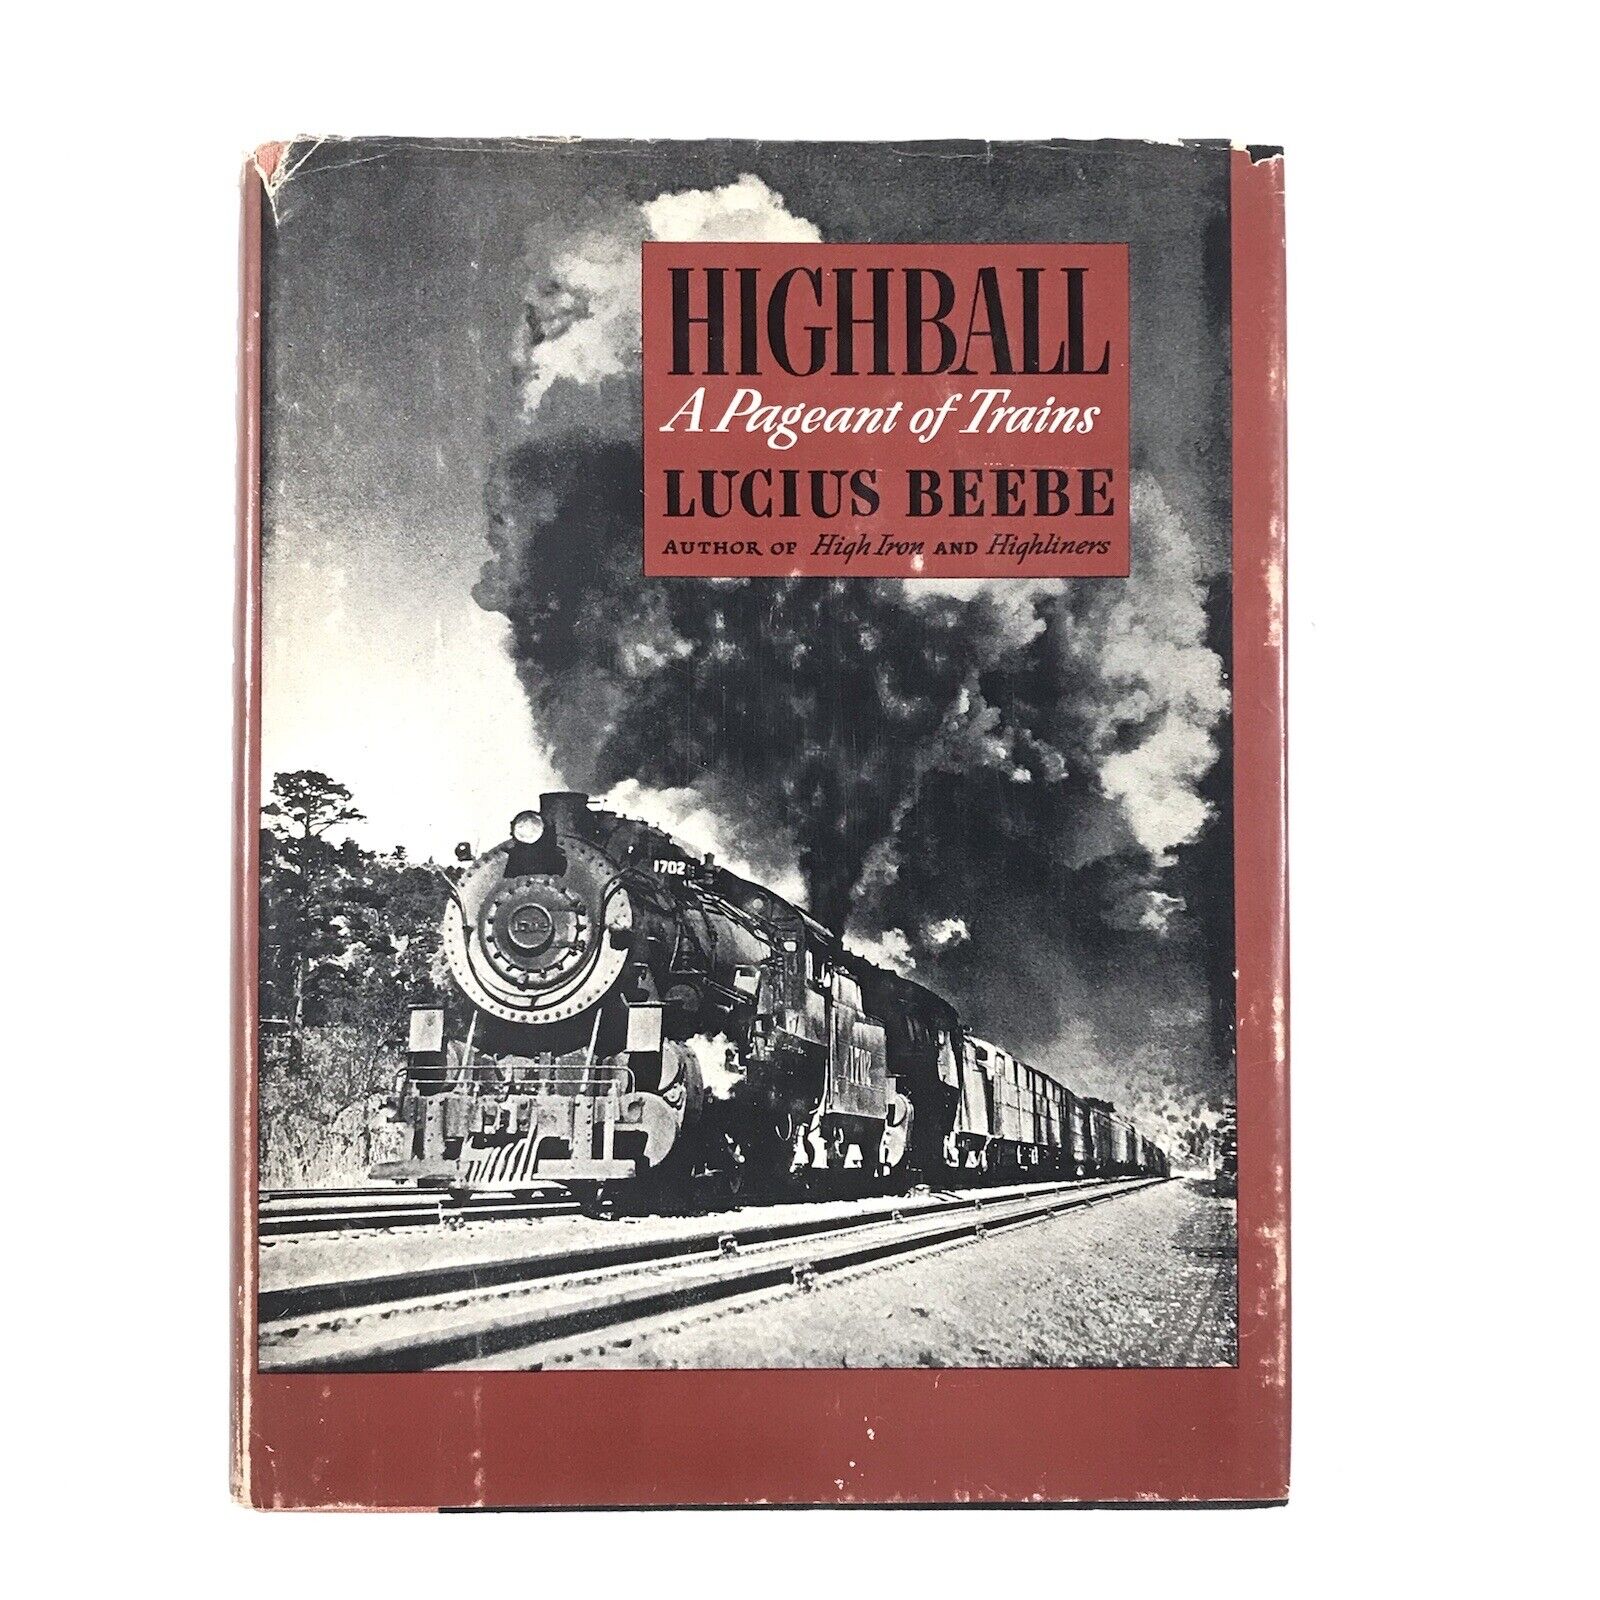 Highball: A Pageant of Trains by Lucius Beebe (Hardcover, 1945)